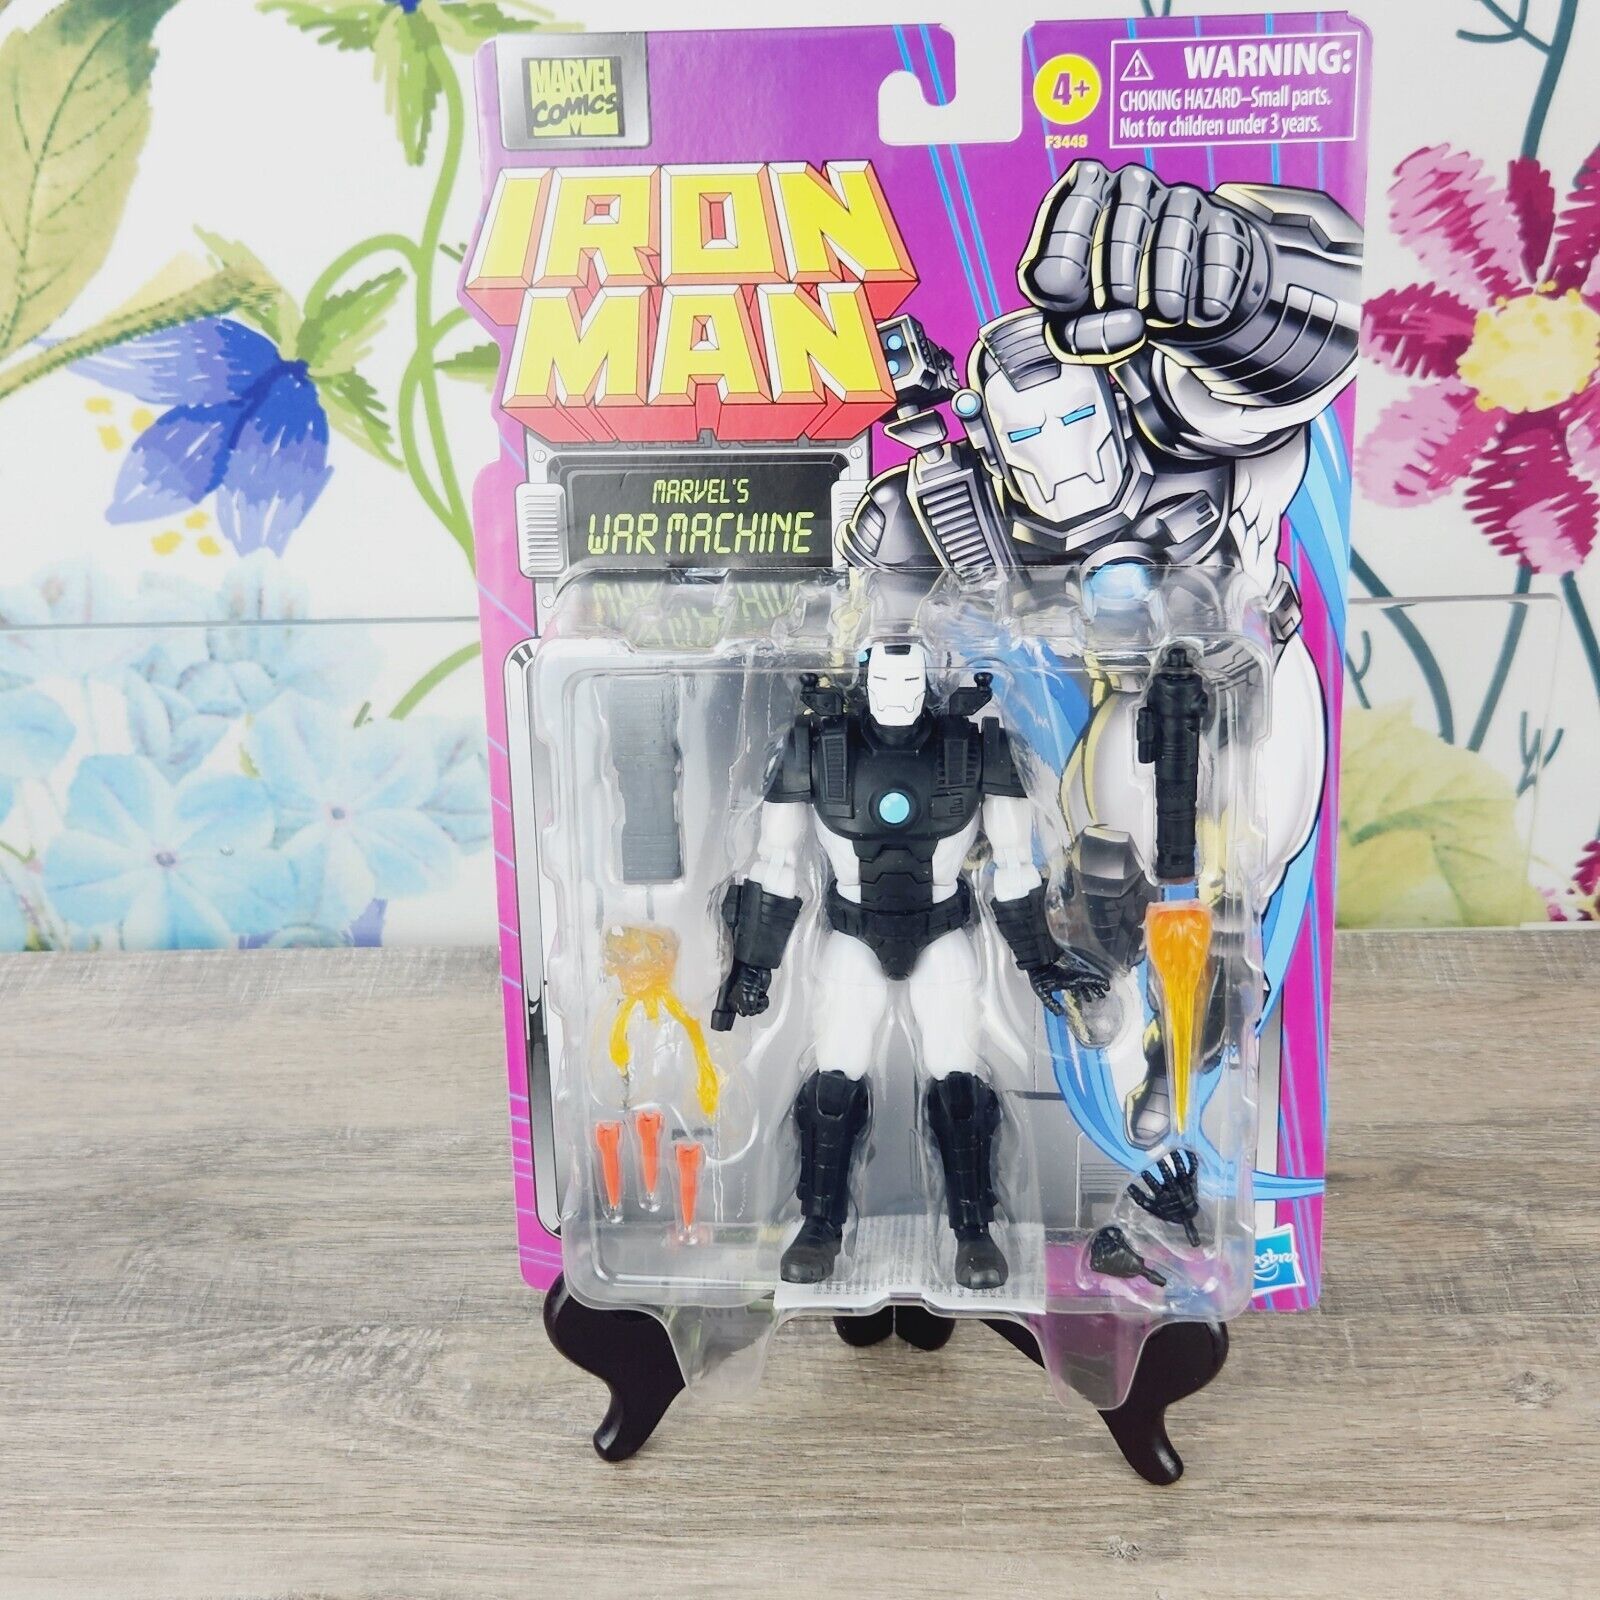 Primary image for Hasbro Marvel Legends Series War Machine 6" Action Figure Iron Man Toy